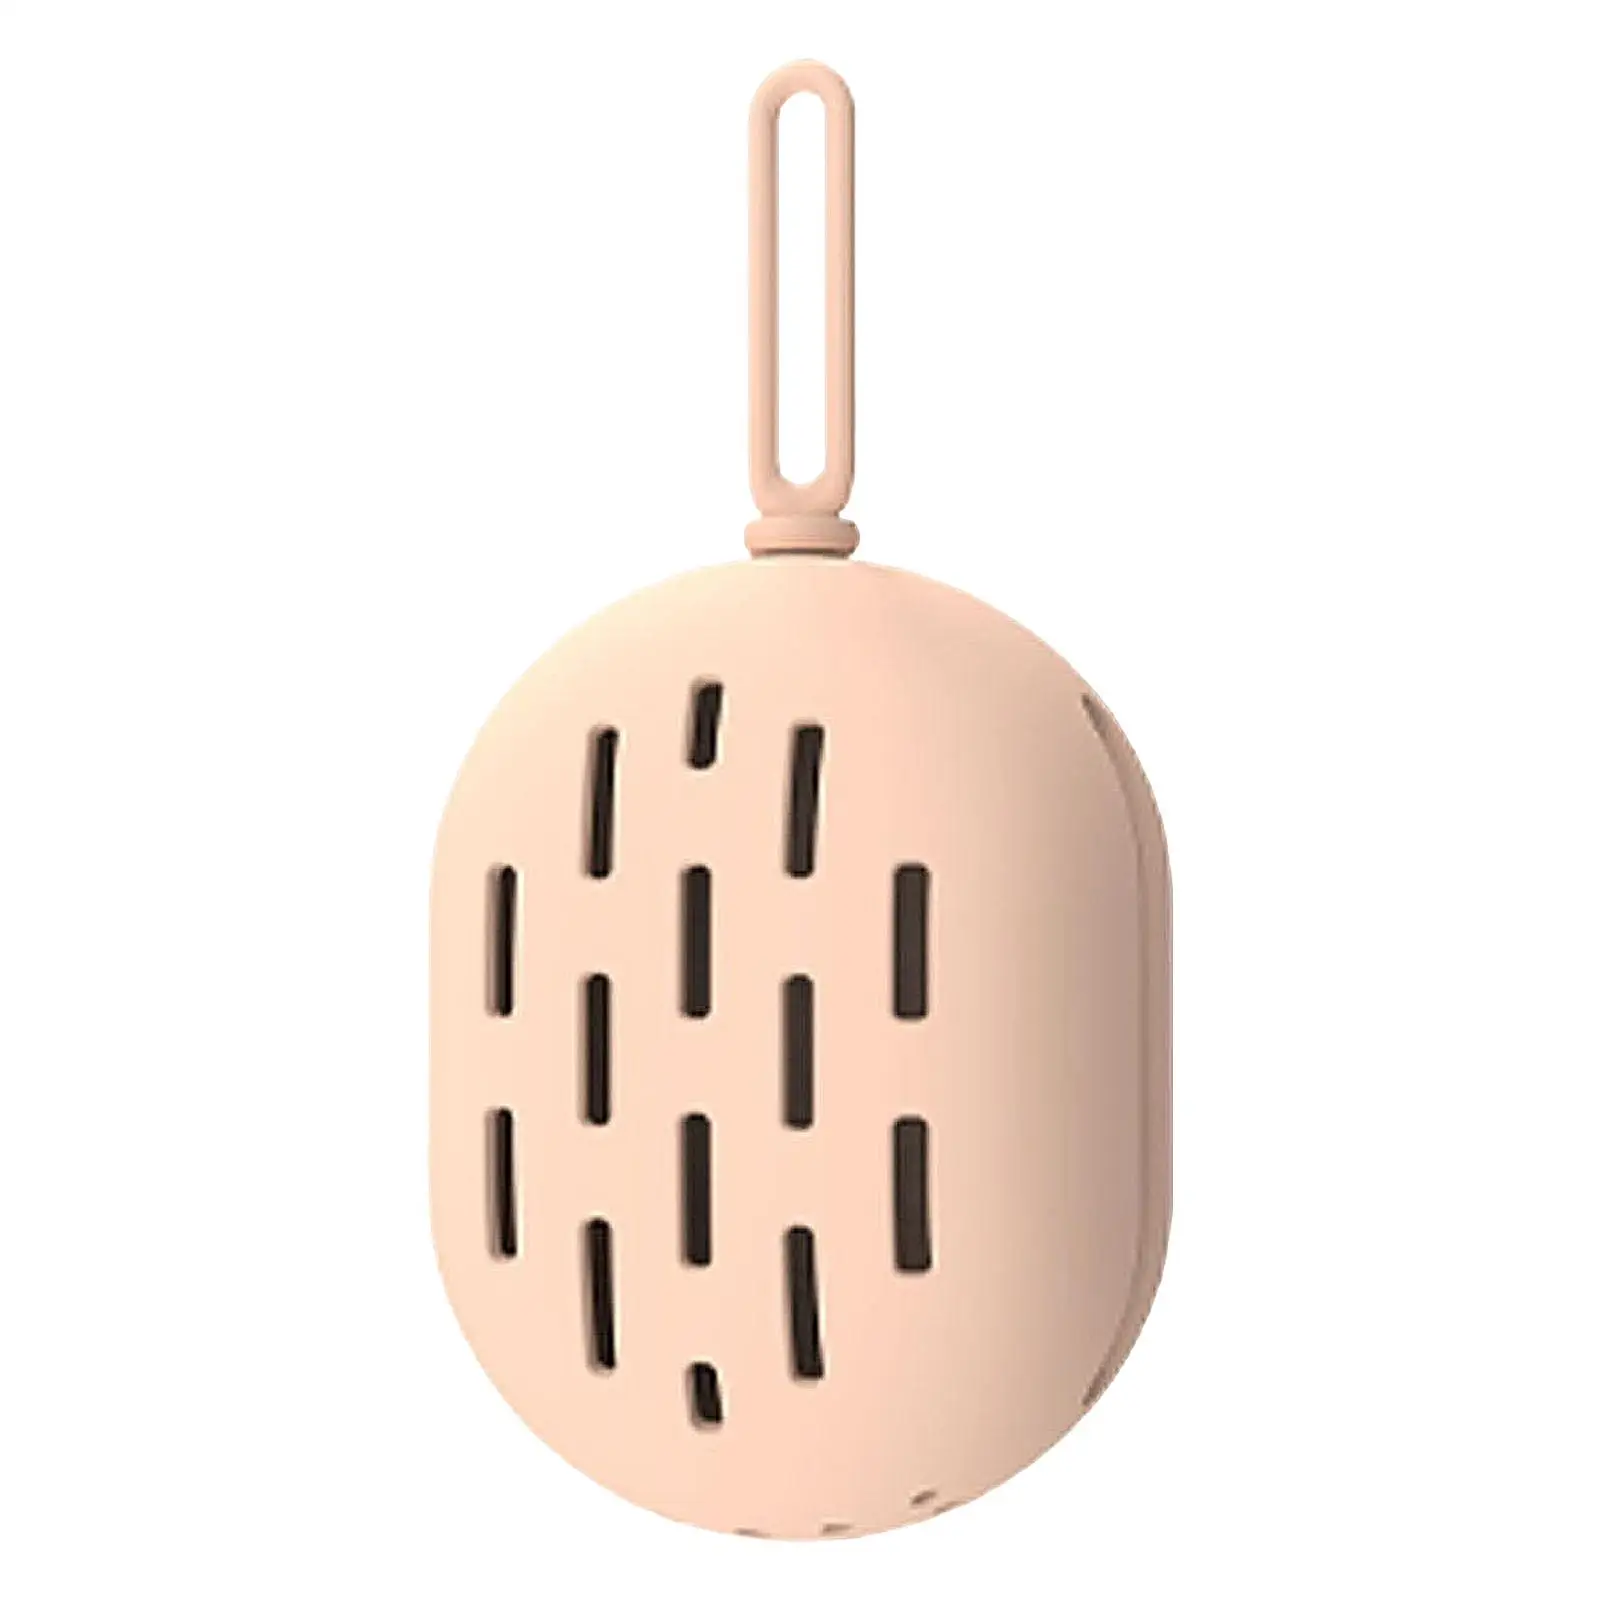 Makeup Sponge Holder Lanyard Design Breathable Shatterproof Organizer Reusable Drying Holder Puff Container for Cosmetics